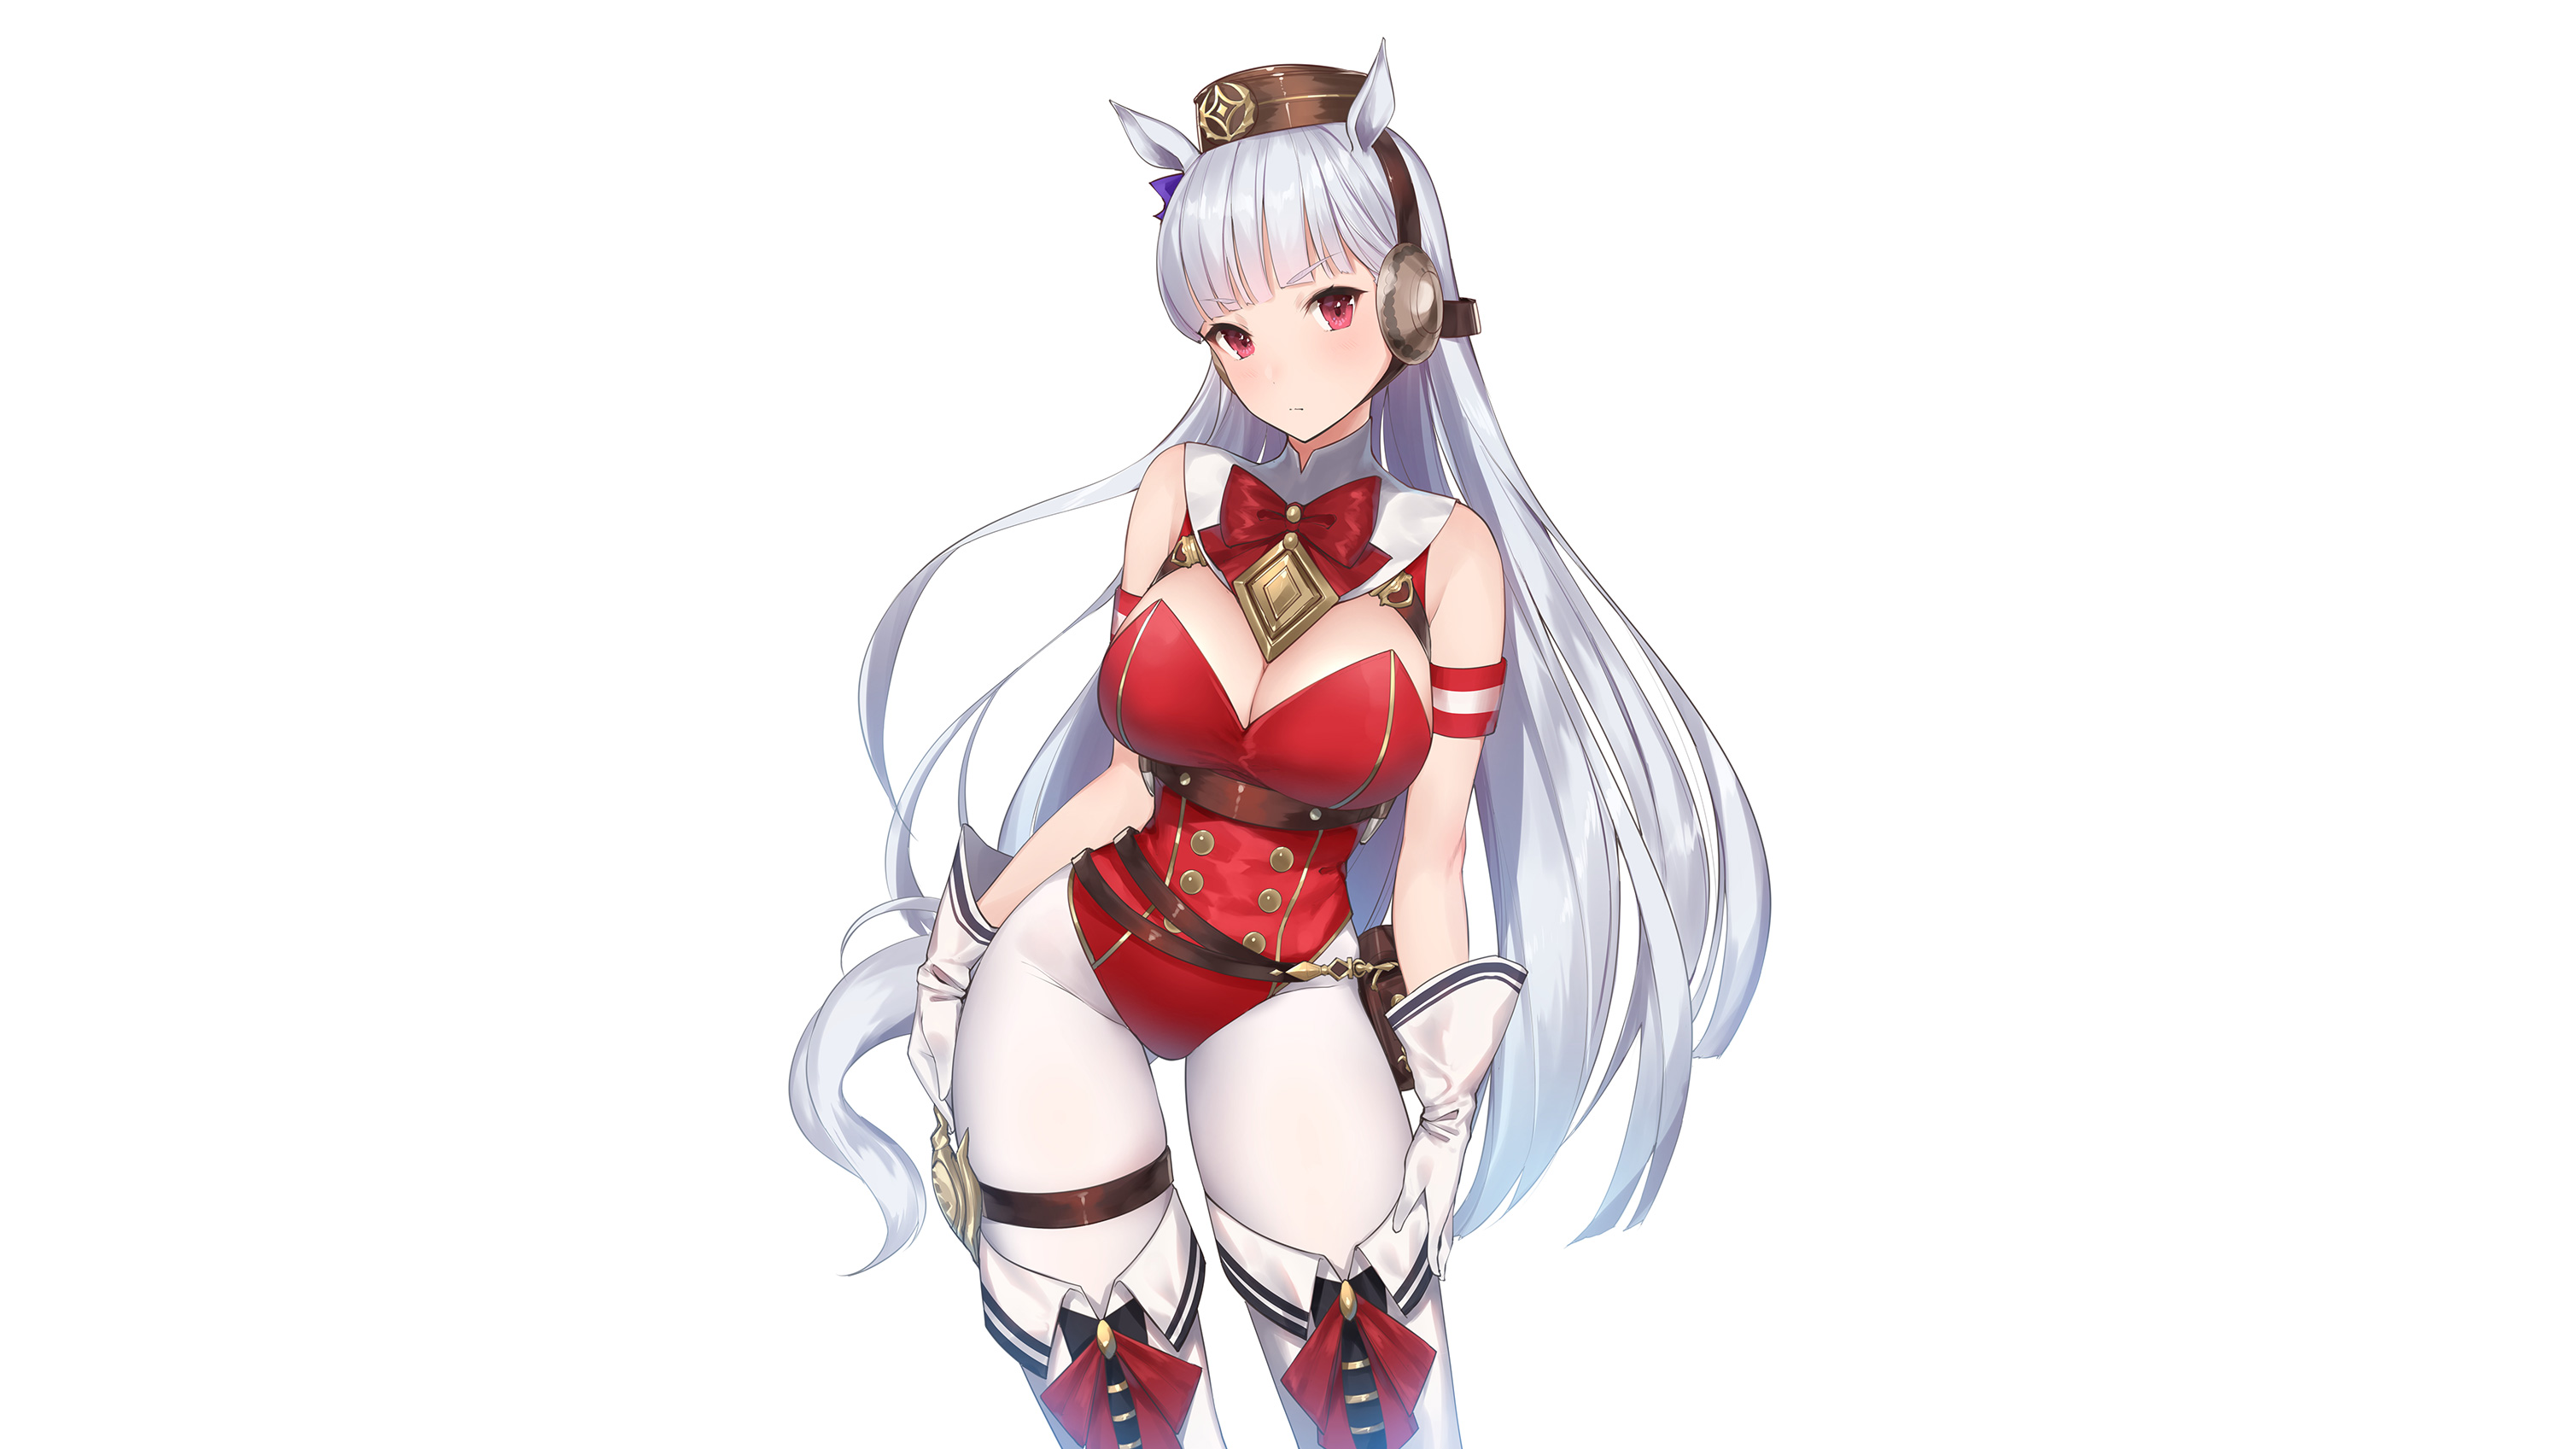 Anime 3017x1697 Uma Musume Pretty Derby Gold Ship (Uma Musume) long hair red eyes white white hair hat gloves cleavage animal ears anime anime girls big boobs simple background white background standing curvy